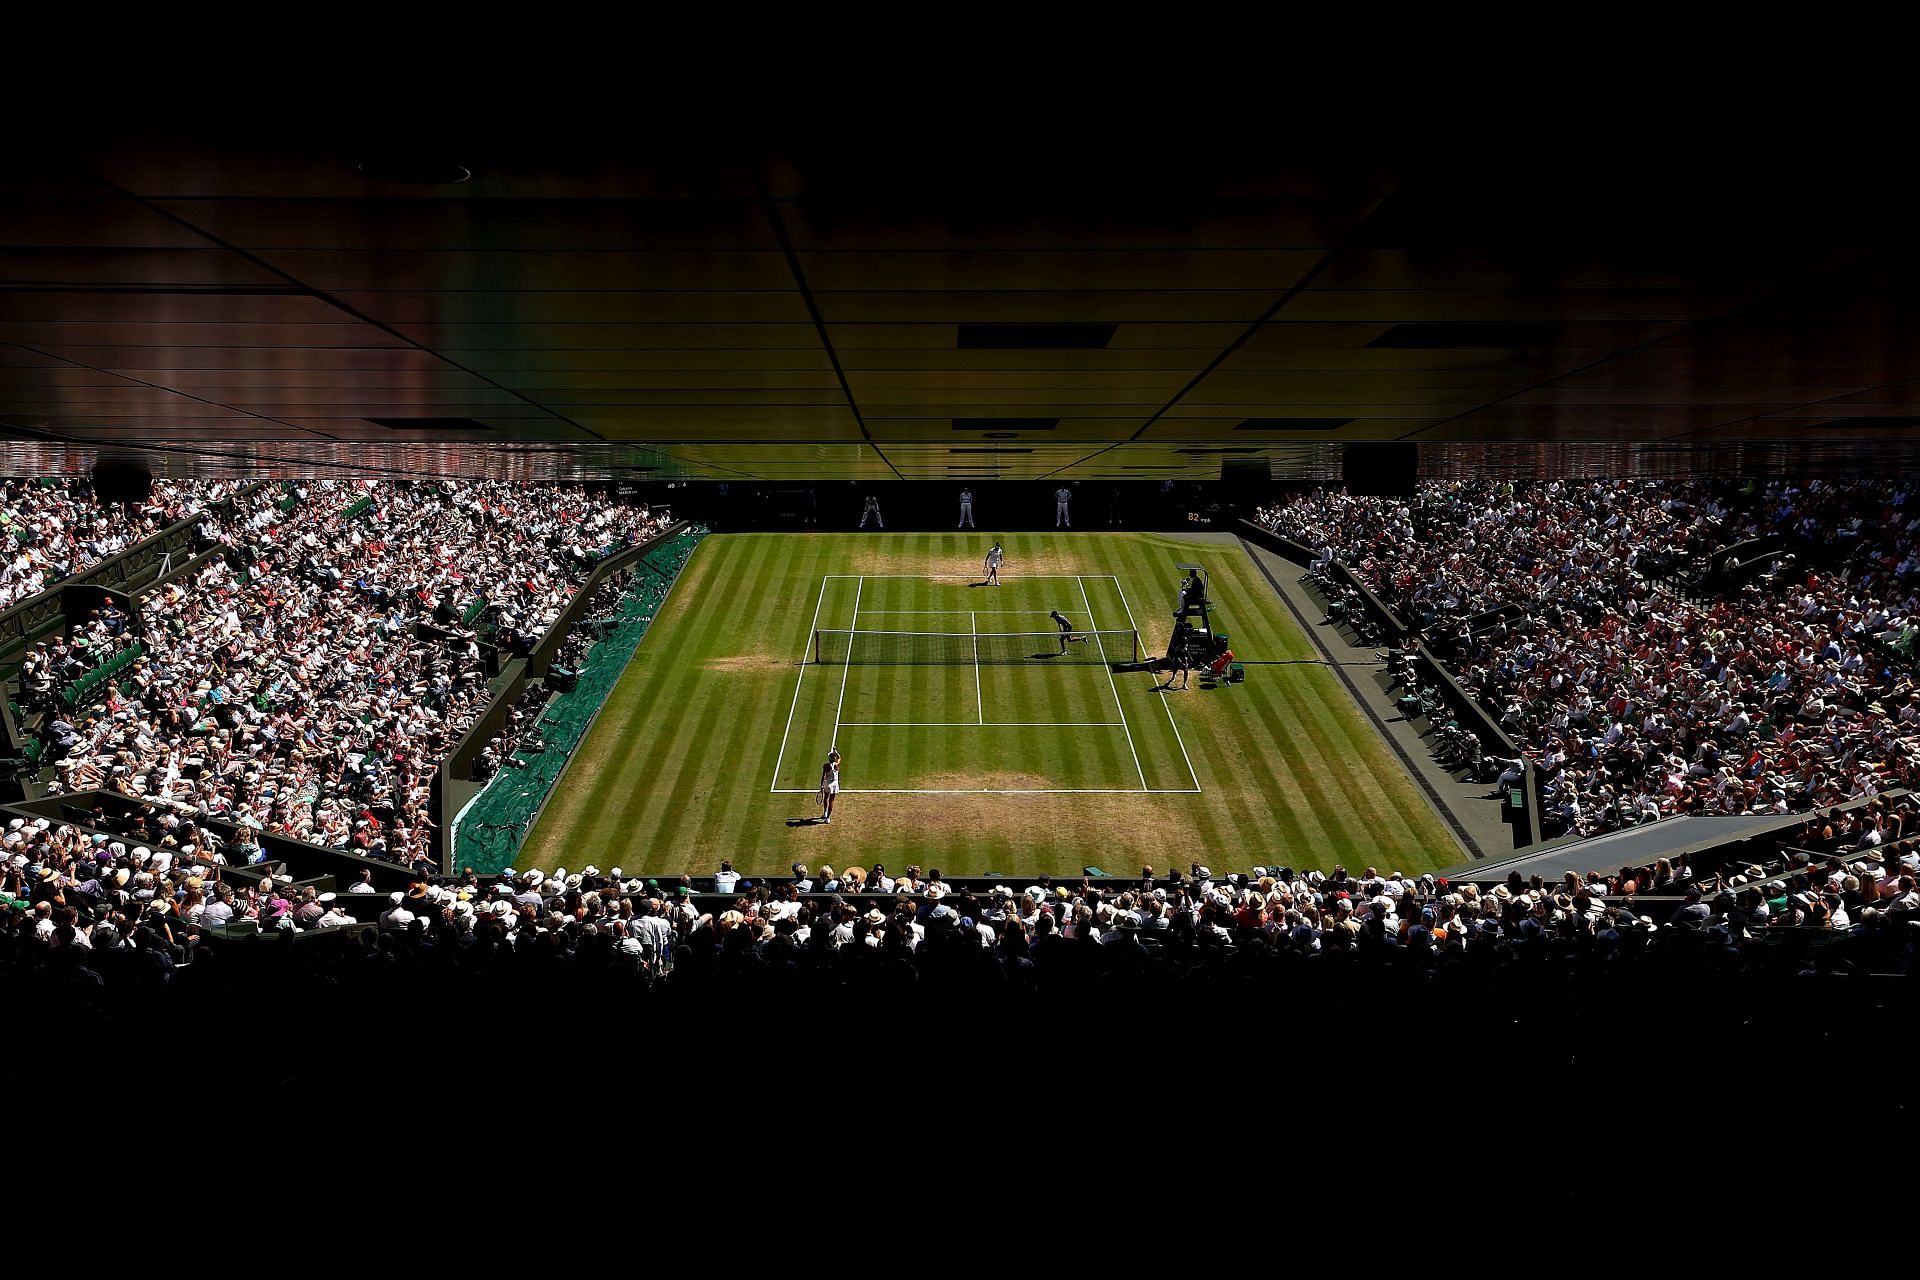 A general view of the Wimbledon Centre Court.